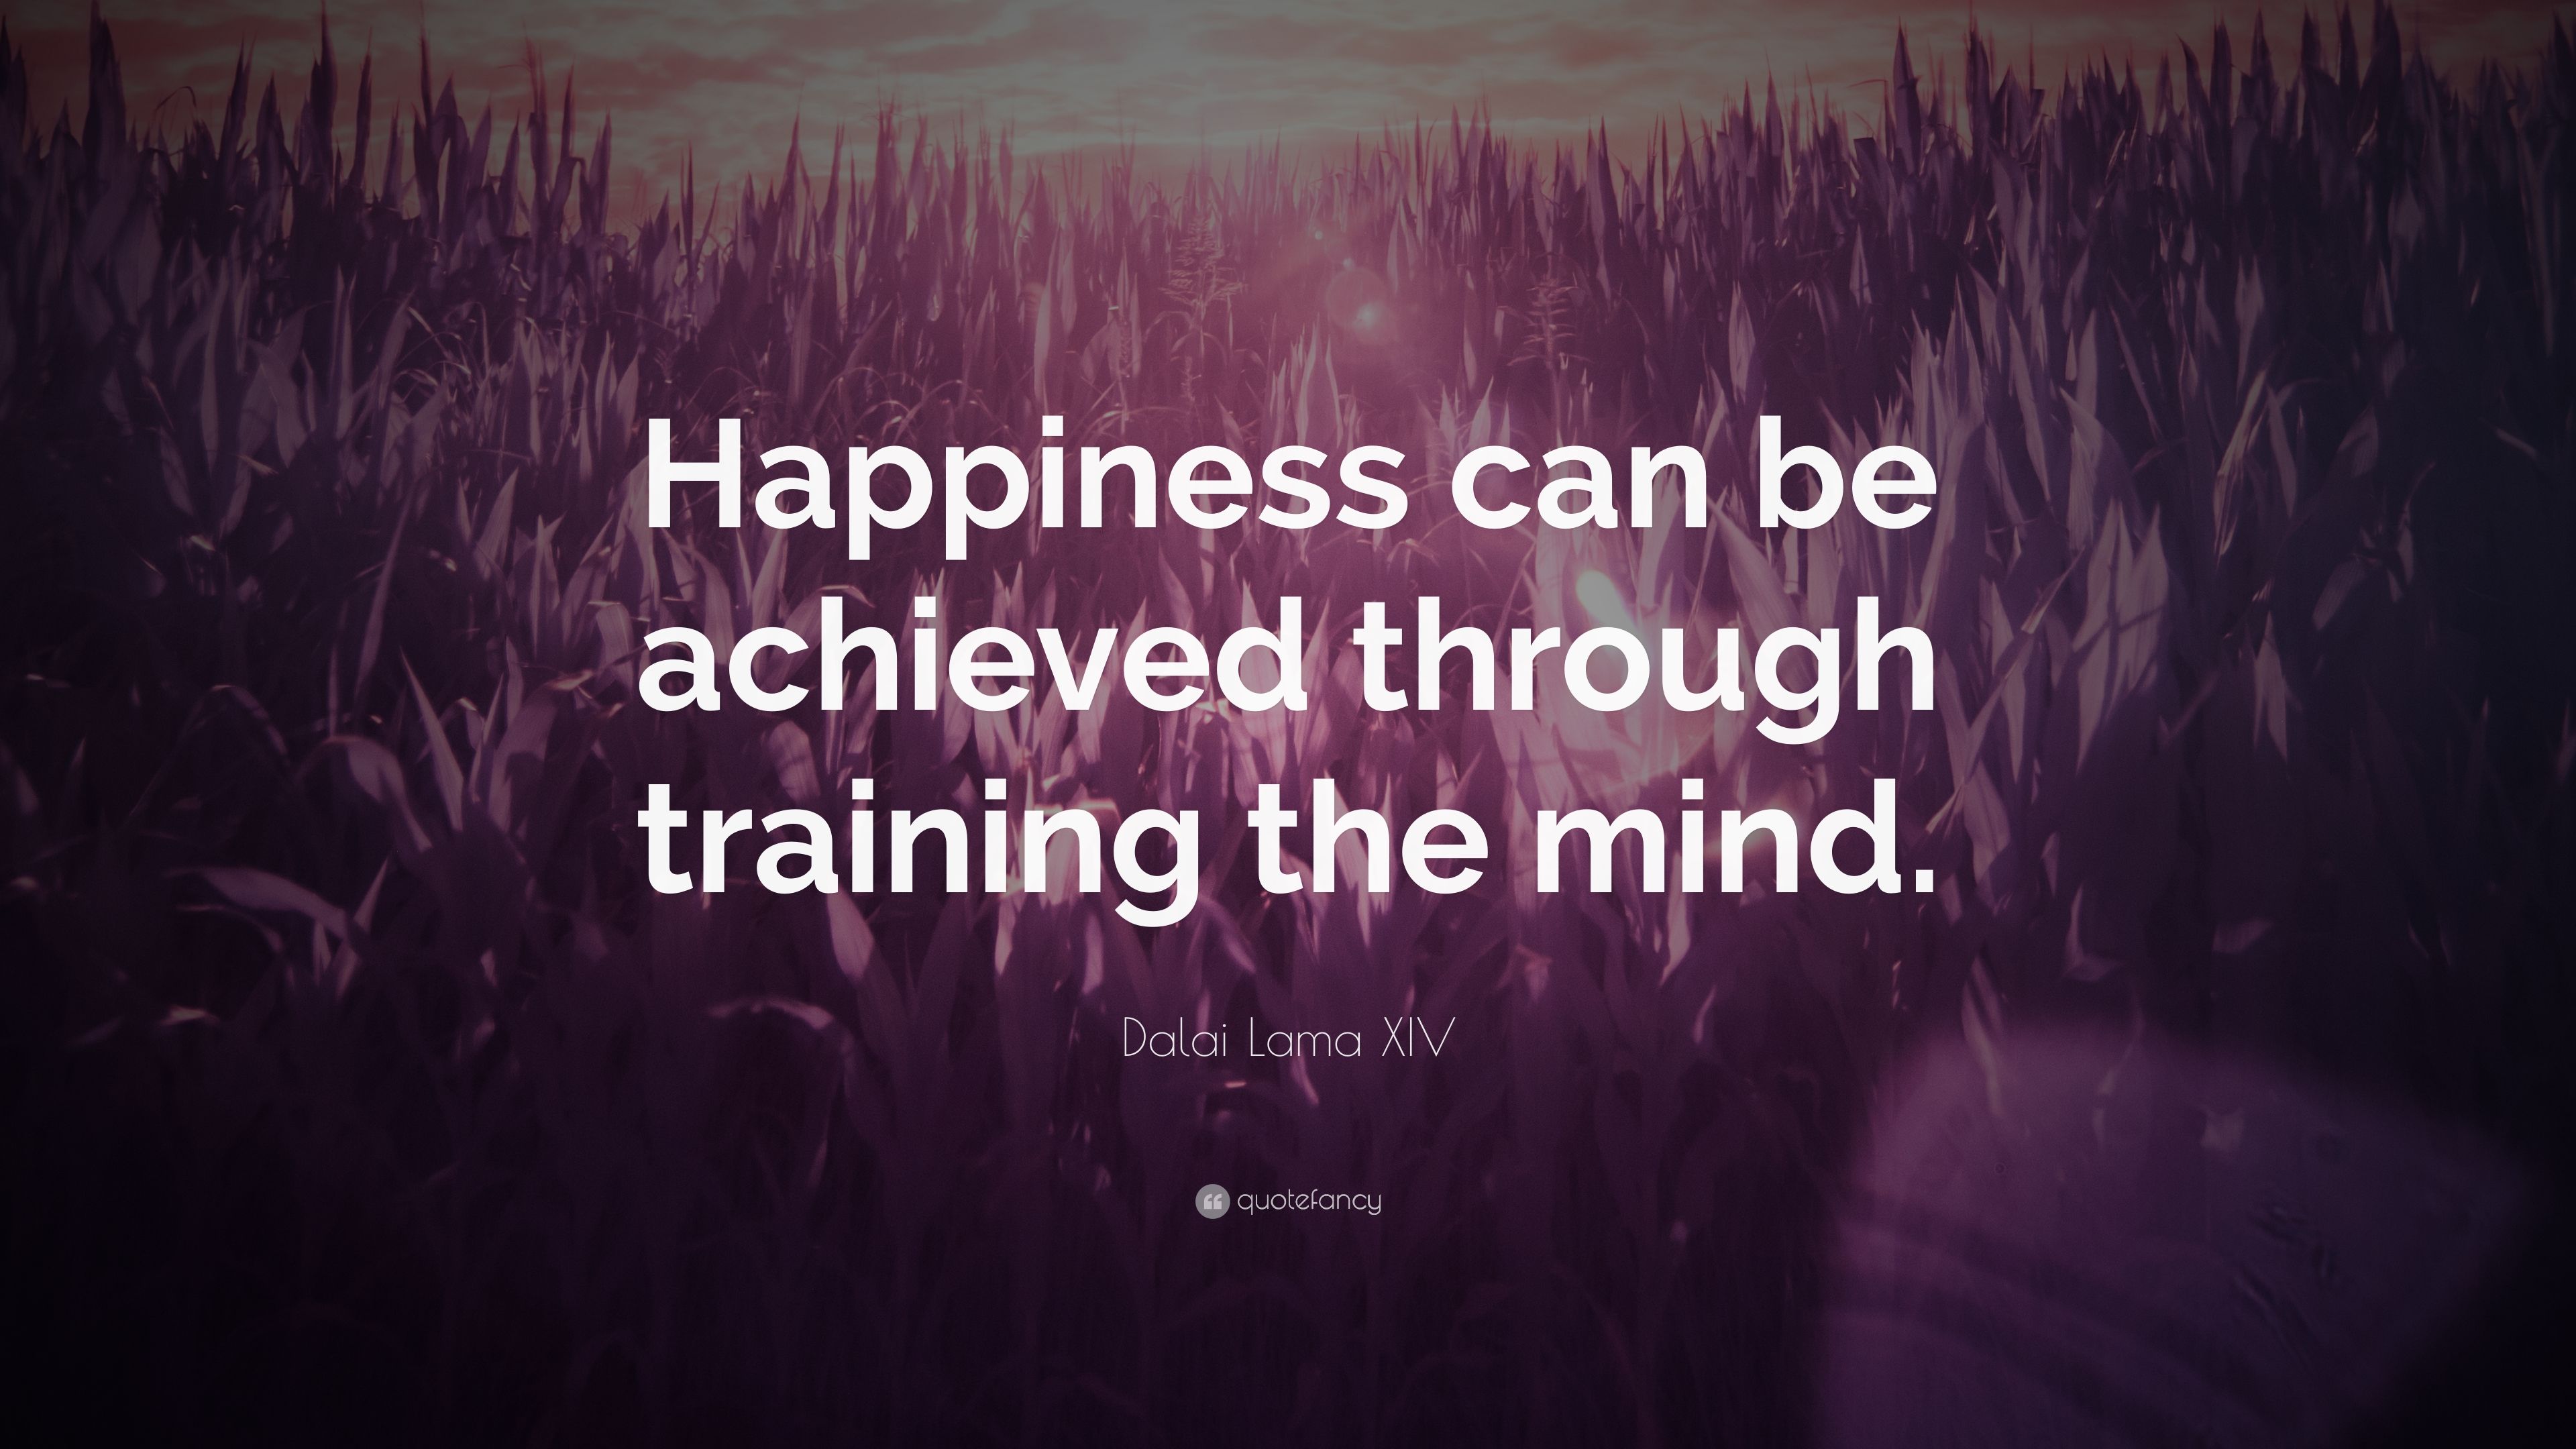 3690469-Dalai-Lama-XIV-Quote-Happiness-can-be-achieved-through-training.jpg